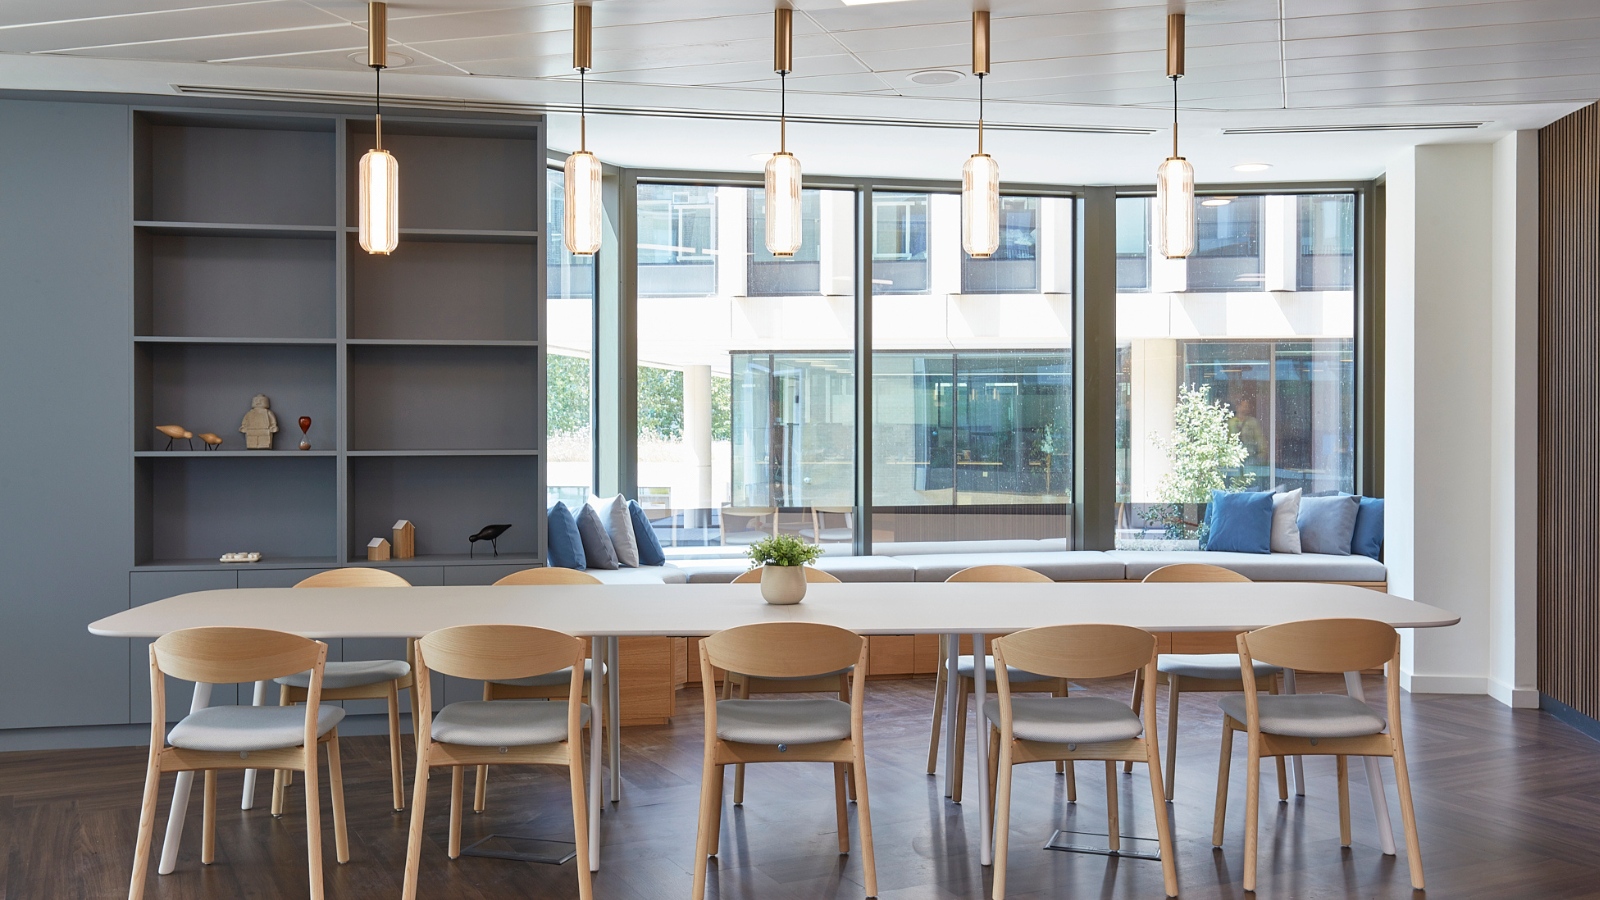 Office design: How to combine luxury and practicality